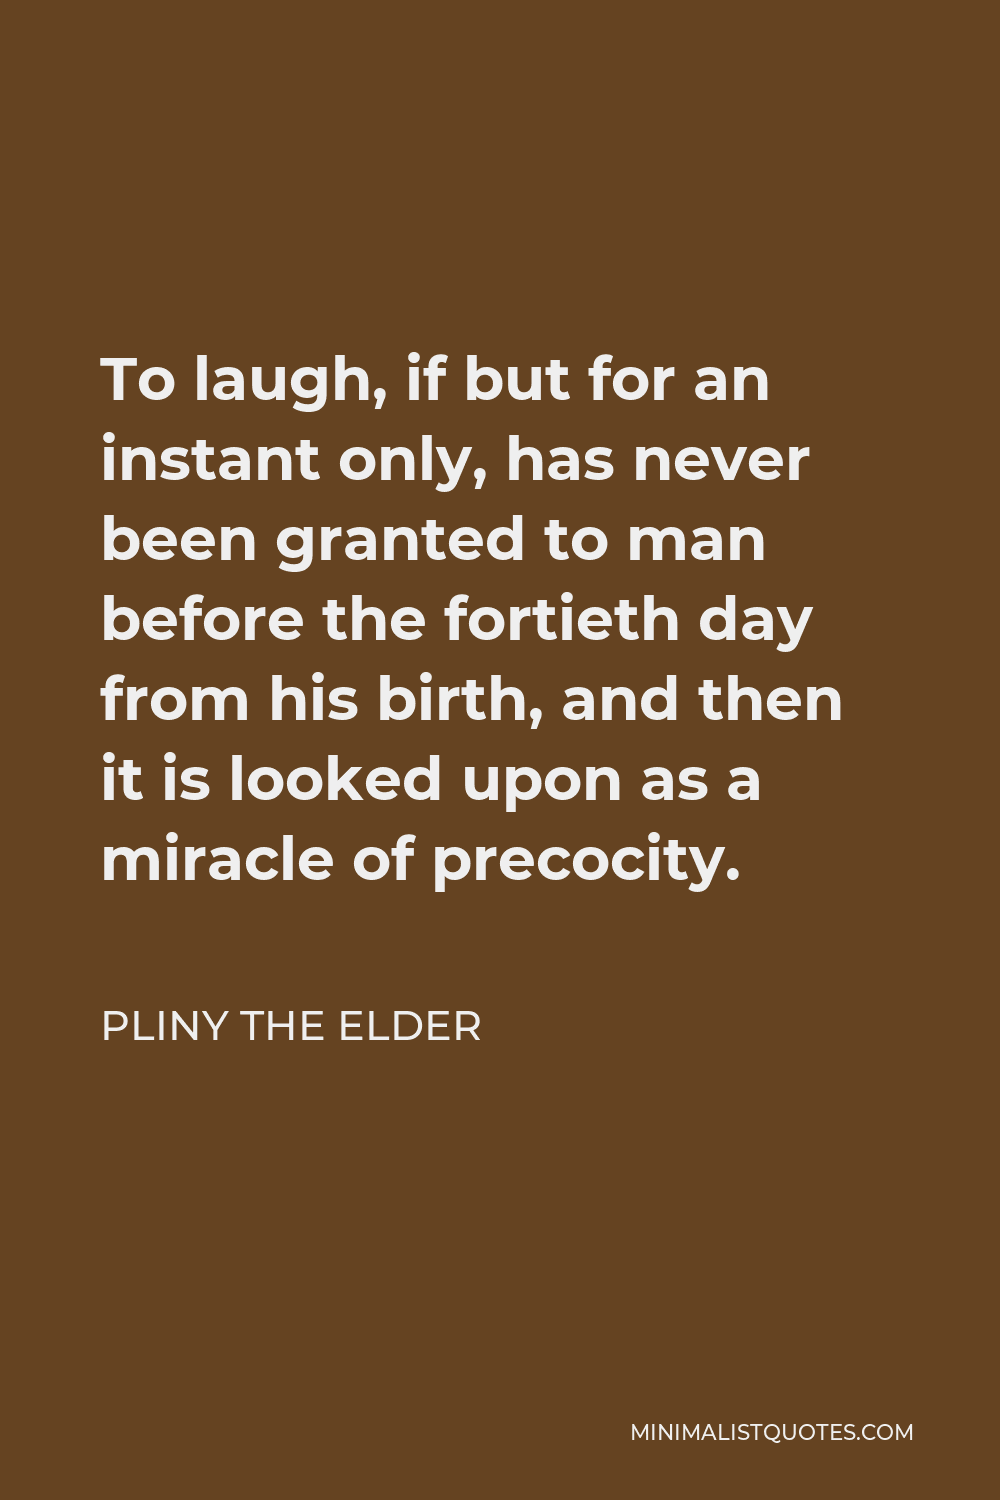 Pliny the Elder Quote - To laugh, if but for an instant only, has never been granted to man before the fortieth day from his birth, and then it is looked upon as a miracle of precocity.